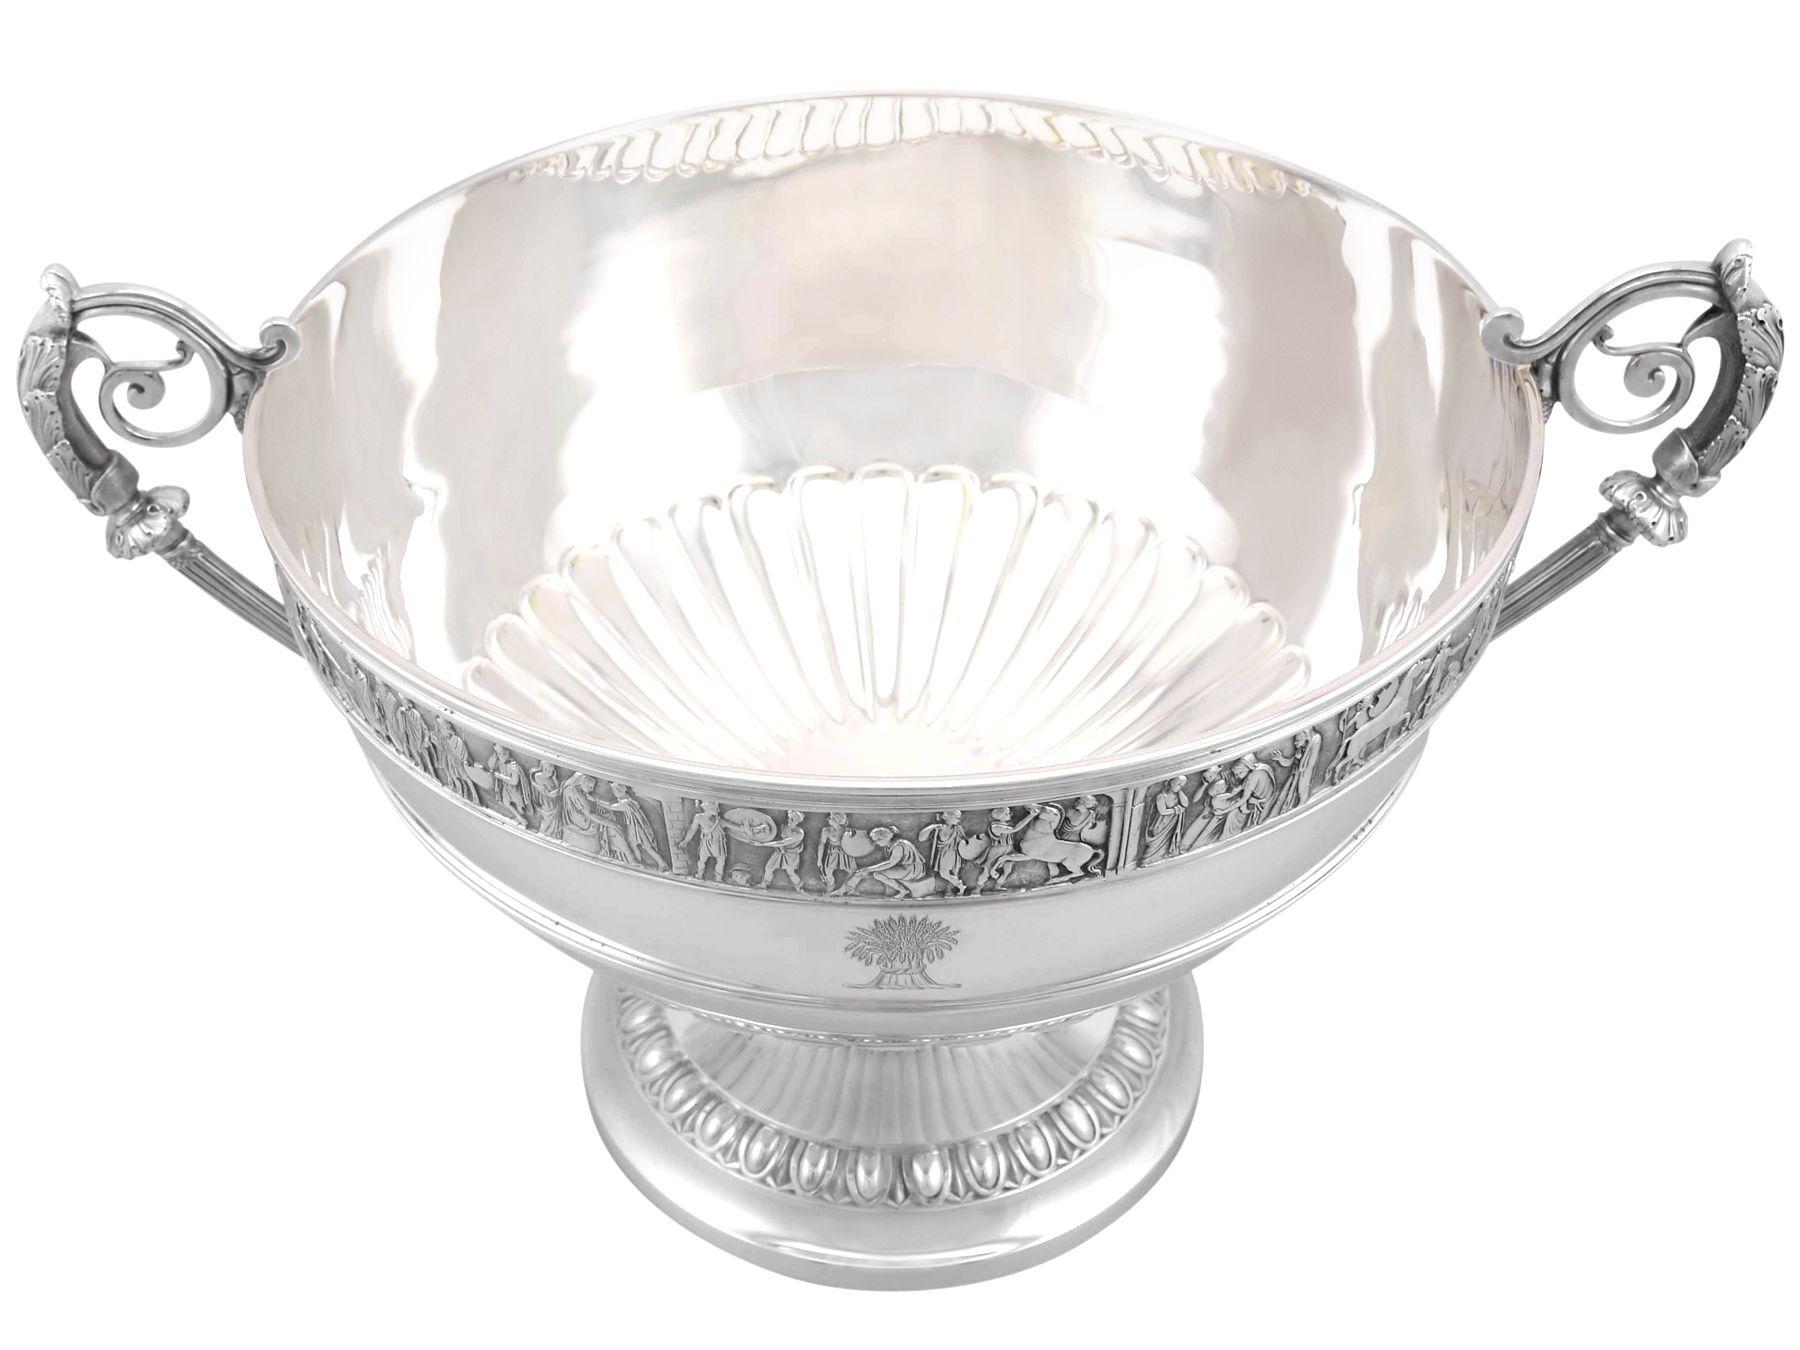 Antique Victorian 1899 Sterling Silver Presentation Bowl In Excellent Condition For Sale In Jesmond, Newcastle Upon Tyne